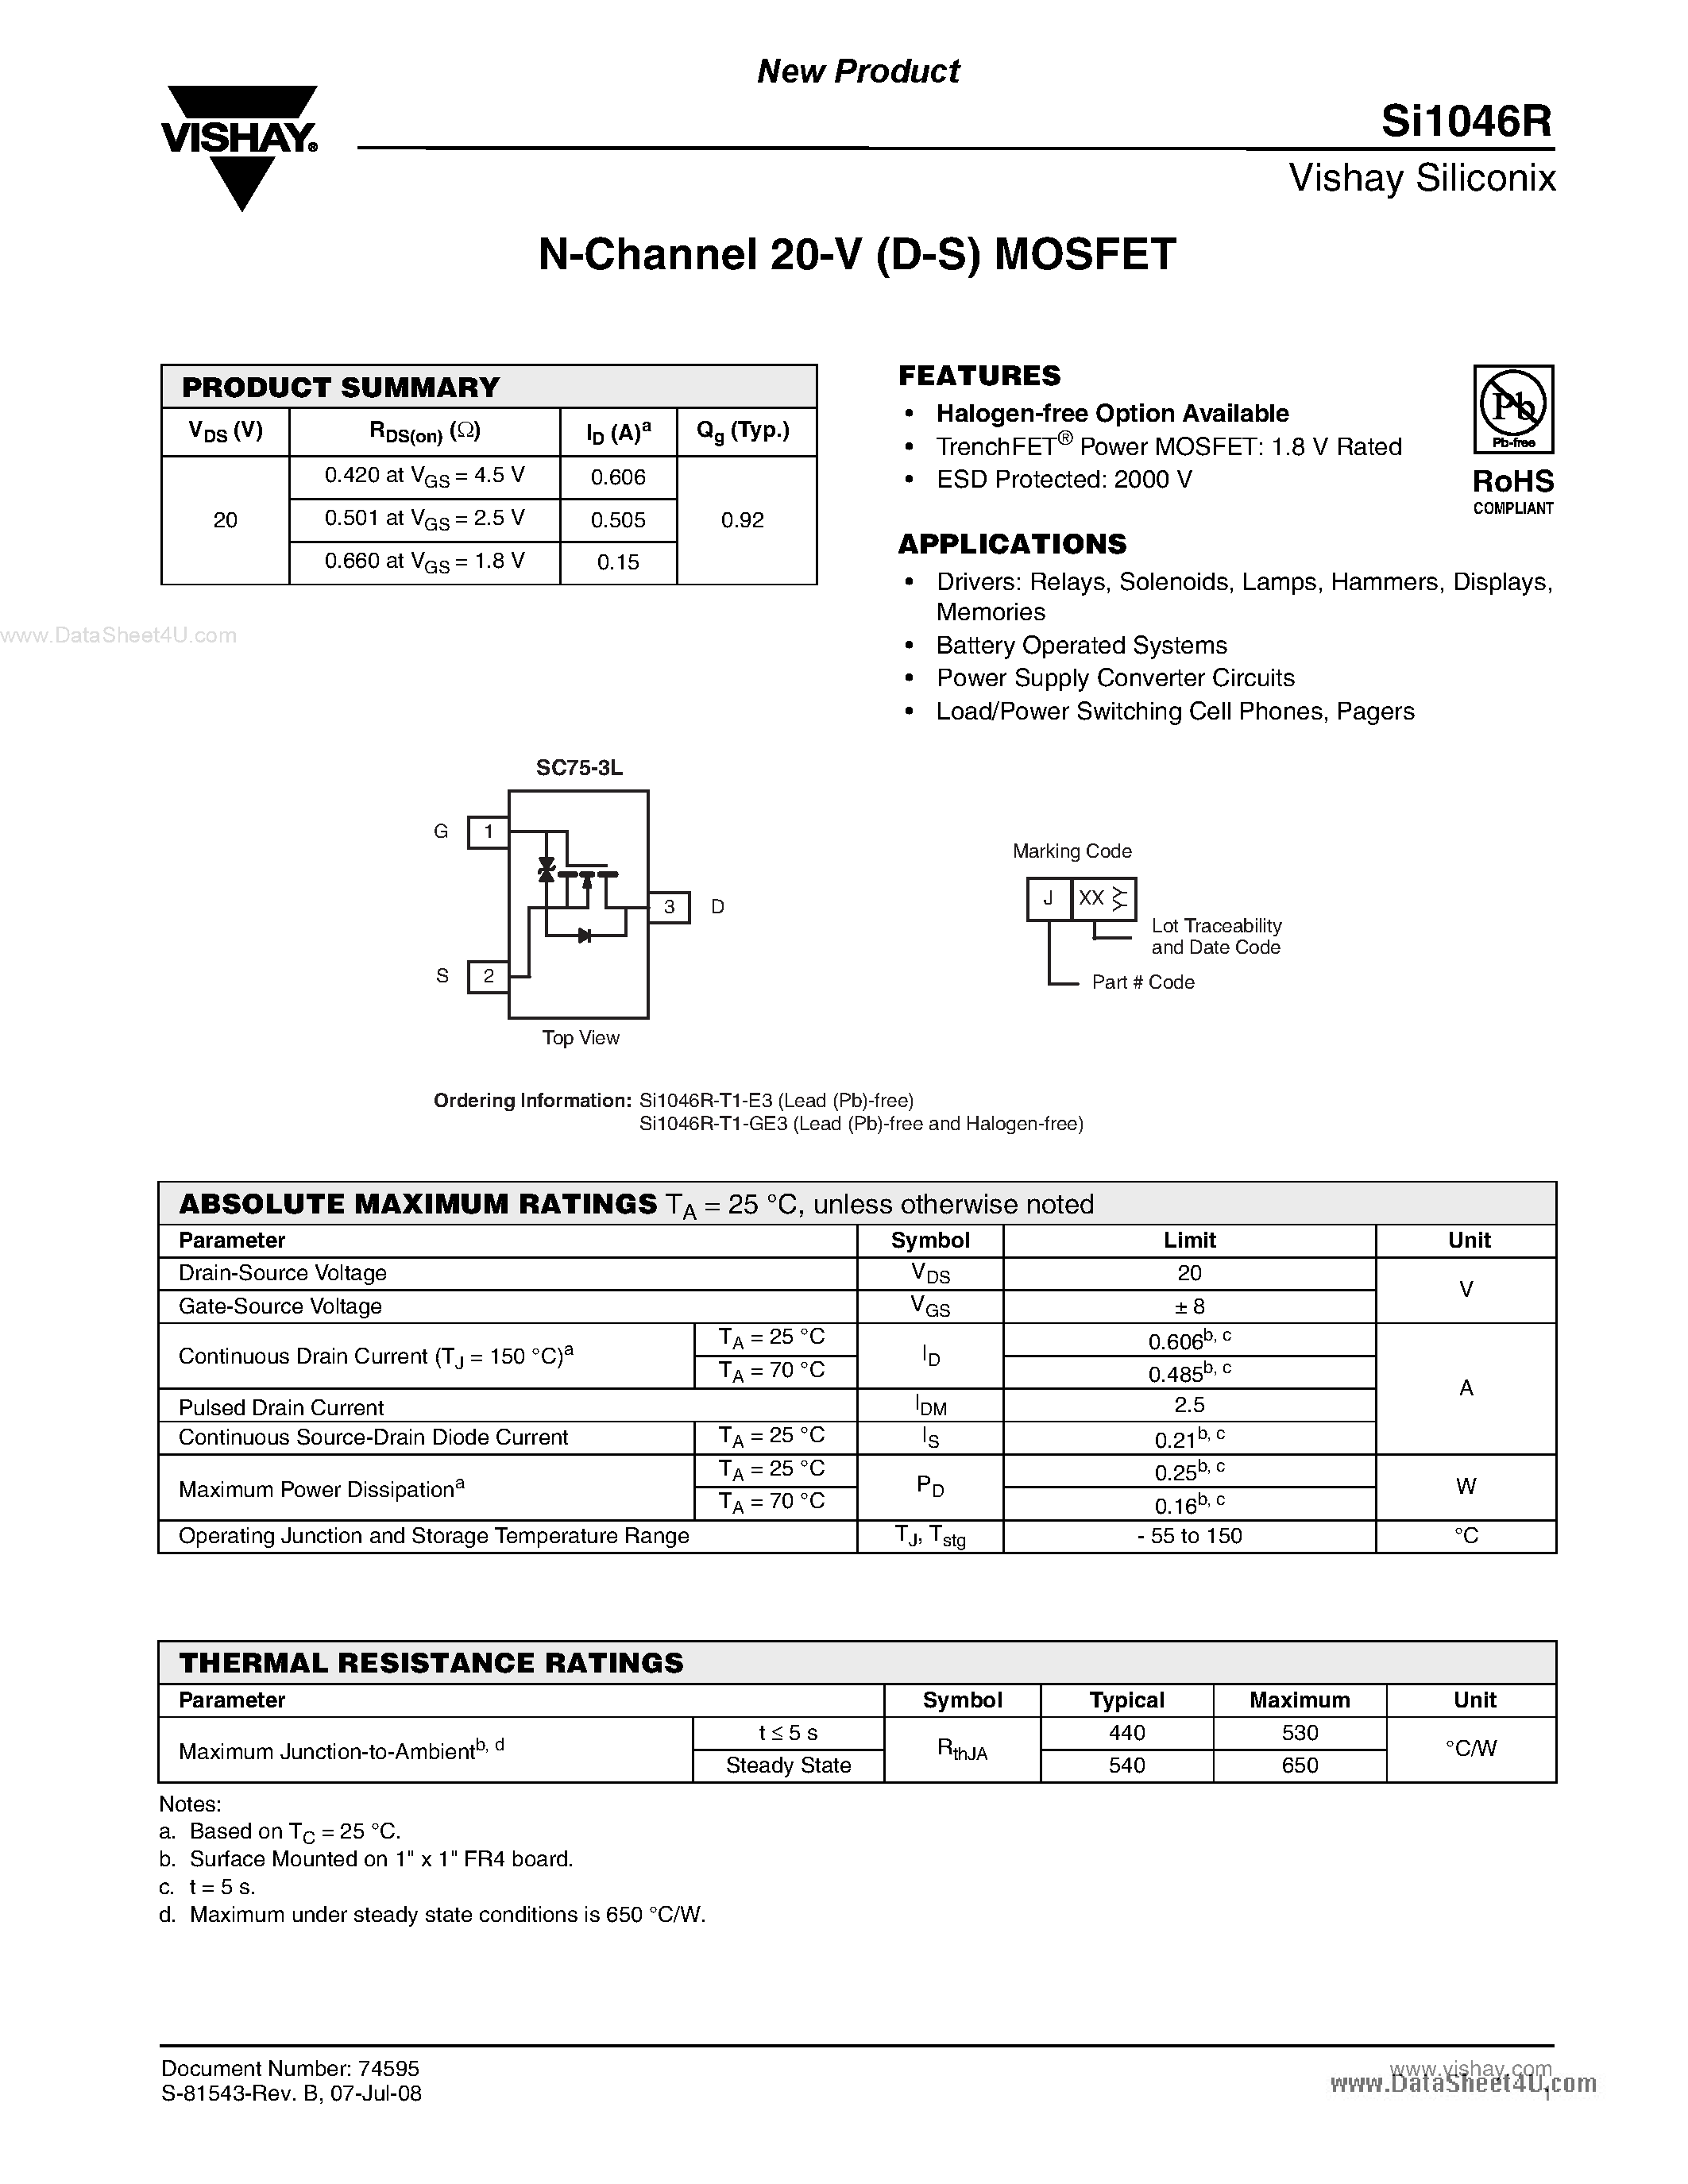 Datasheet SI1046R - N-Channel MOSFET page 1